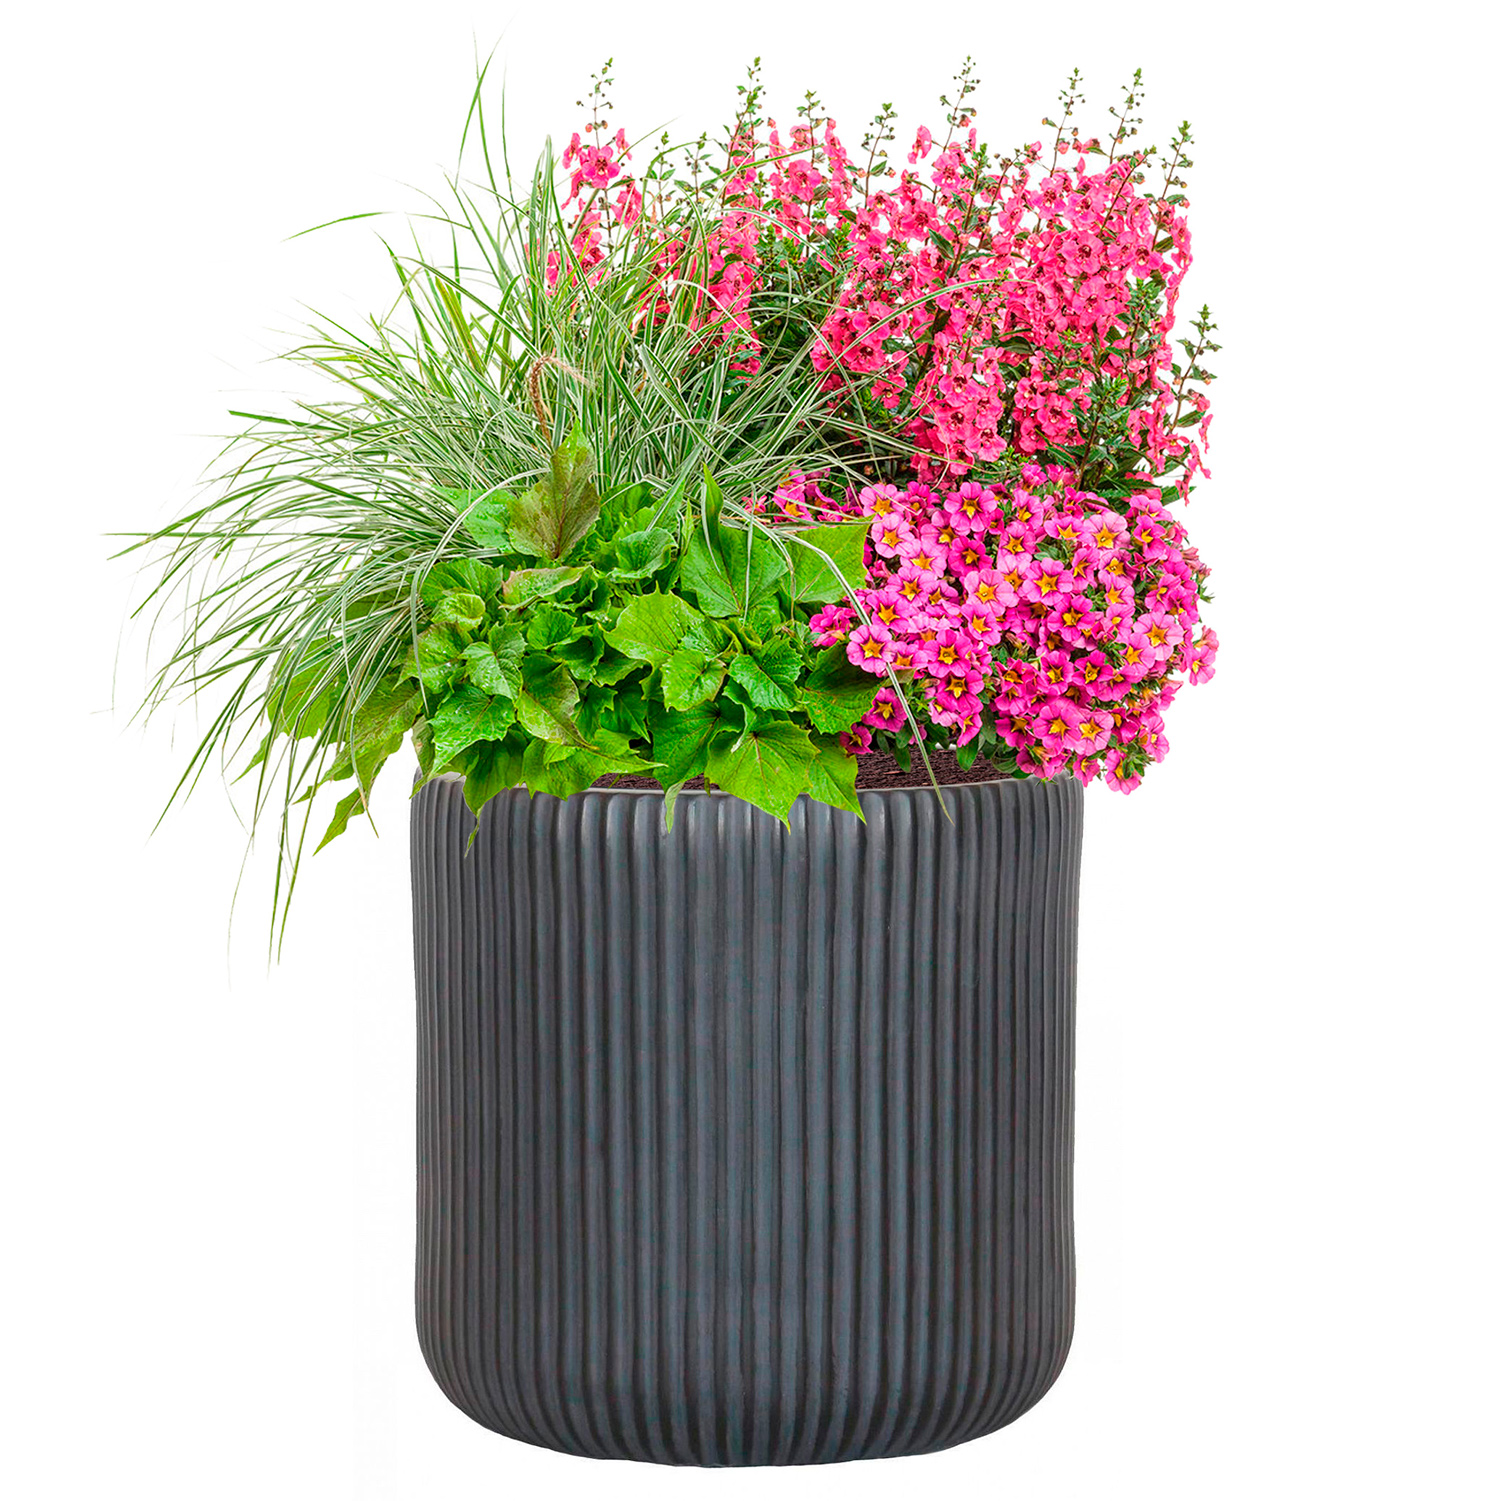 Ribbed Black Round Outdoor Planter D30 H30.5 cm, 21.6 ltrs Cap.